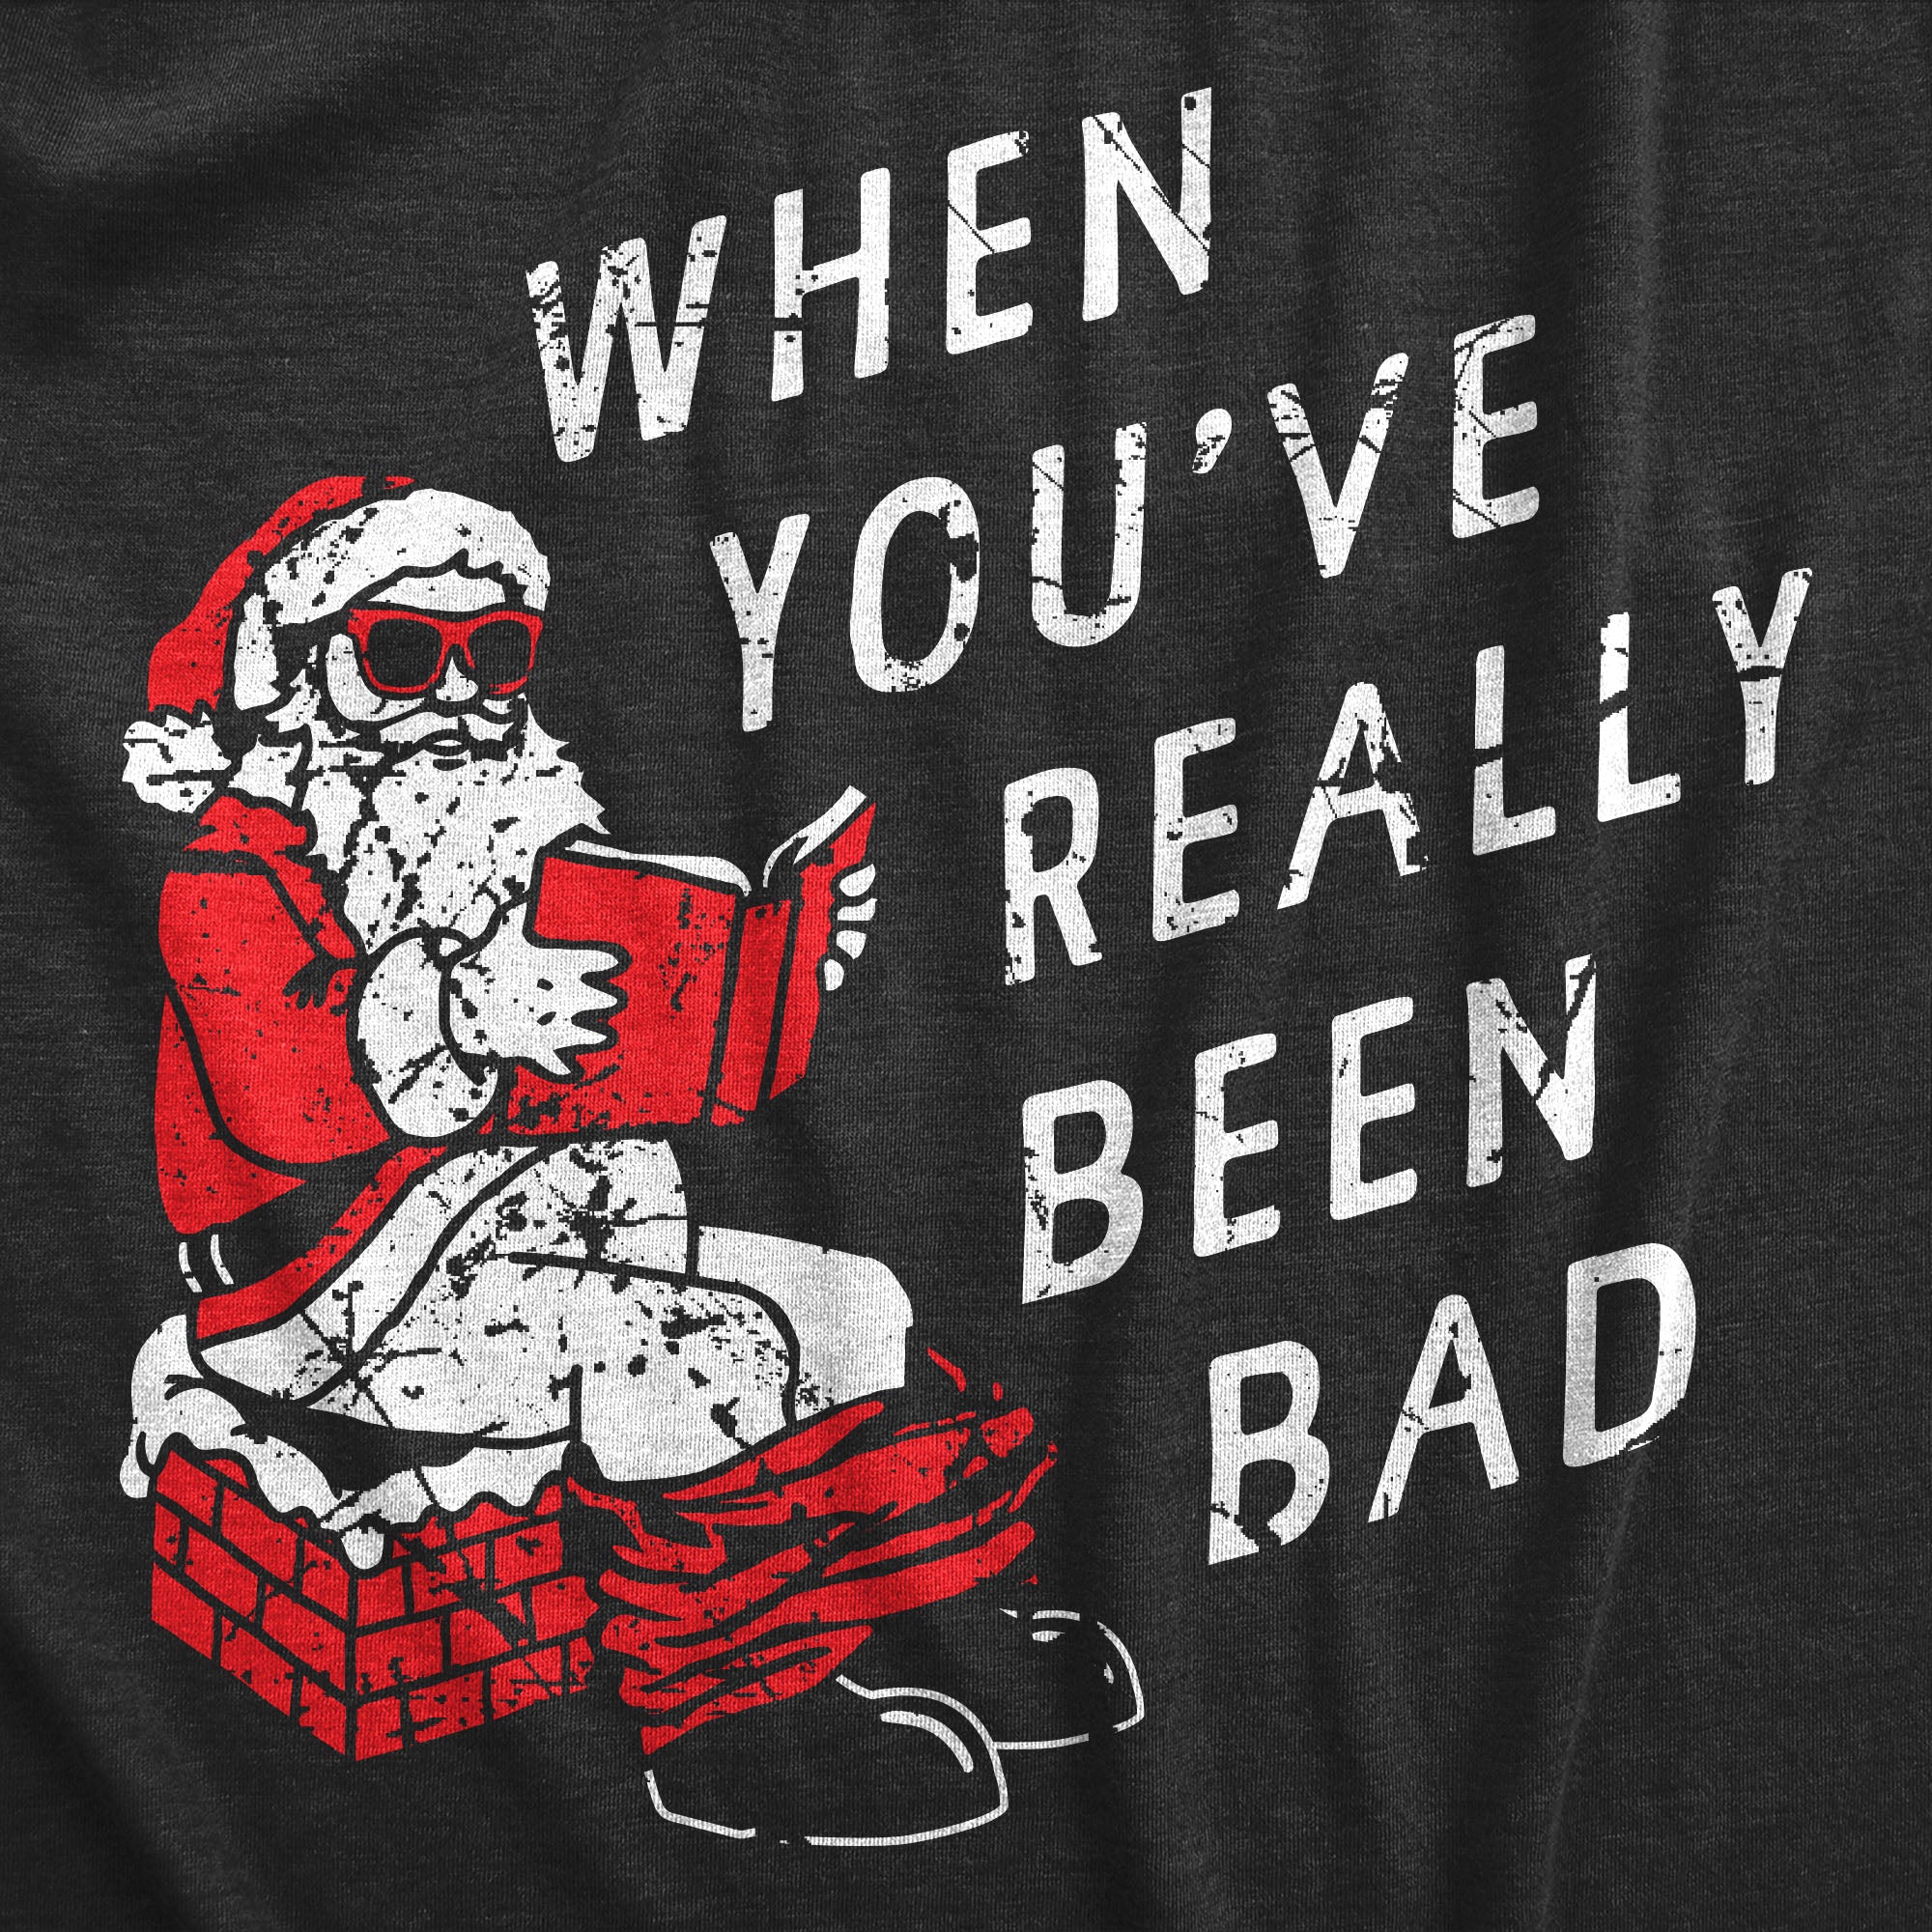 Funny Heather Black - Really Bad When Youve Really Been Bad Womens T Shirt Nerdy Christmas Toilet Sarcastic Tee